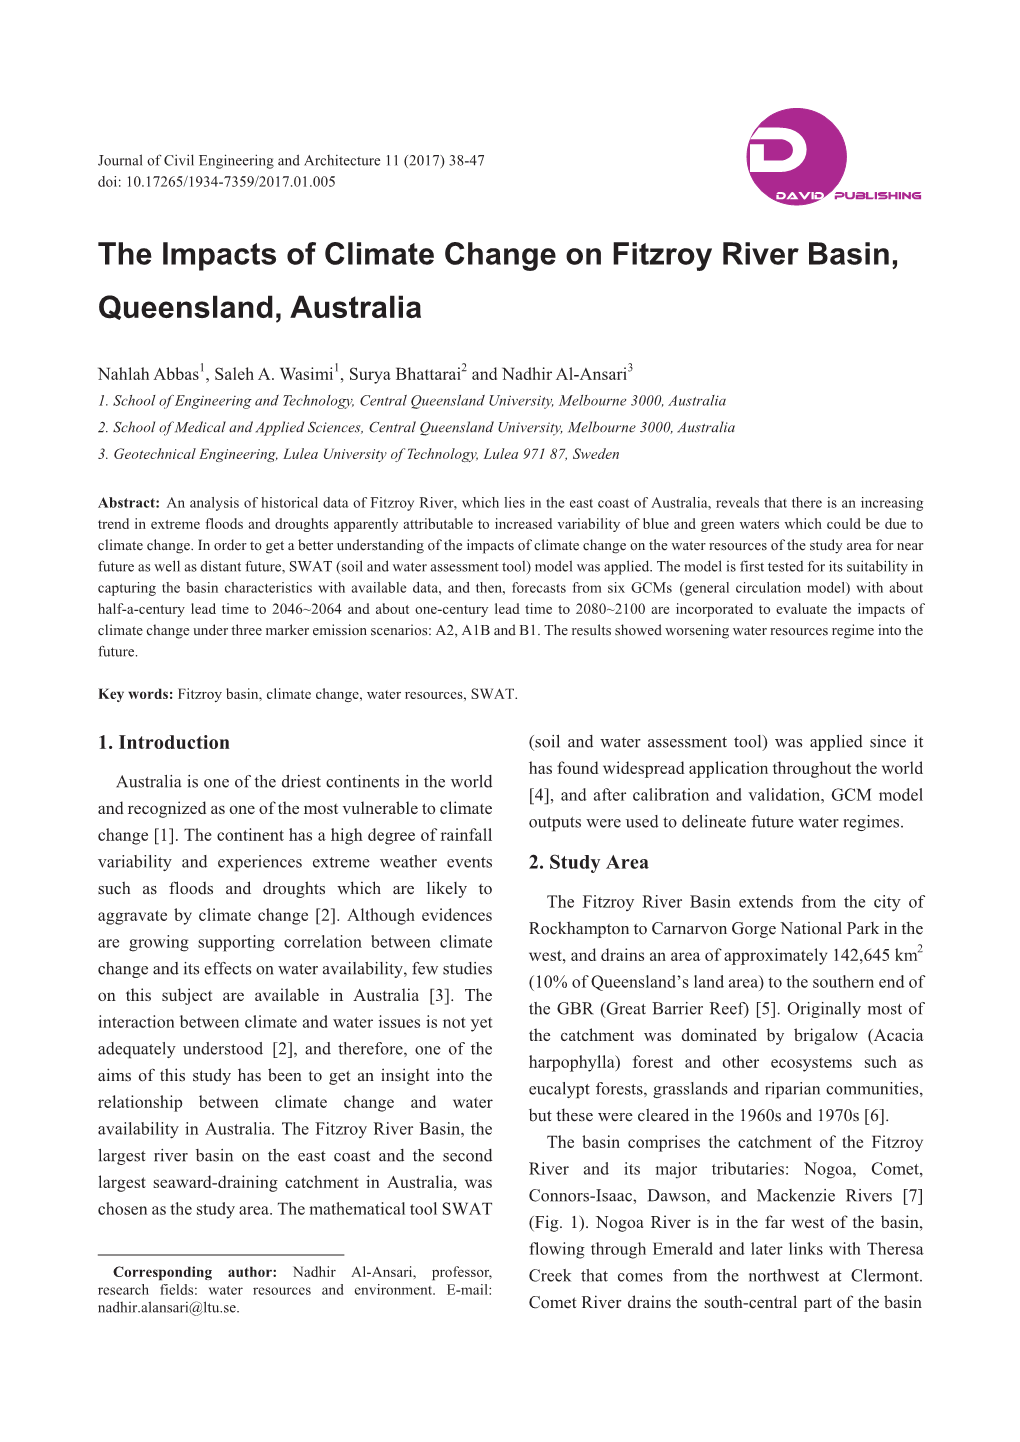 The Impacts of Climate Change on Fitzroy River Basin, Queensland, Australia